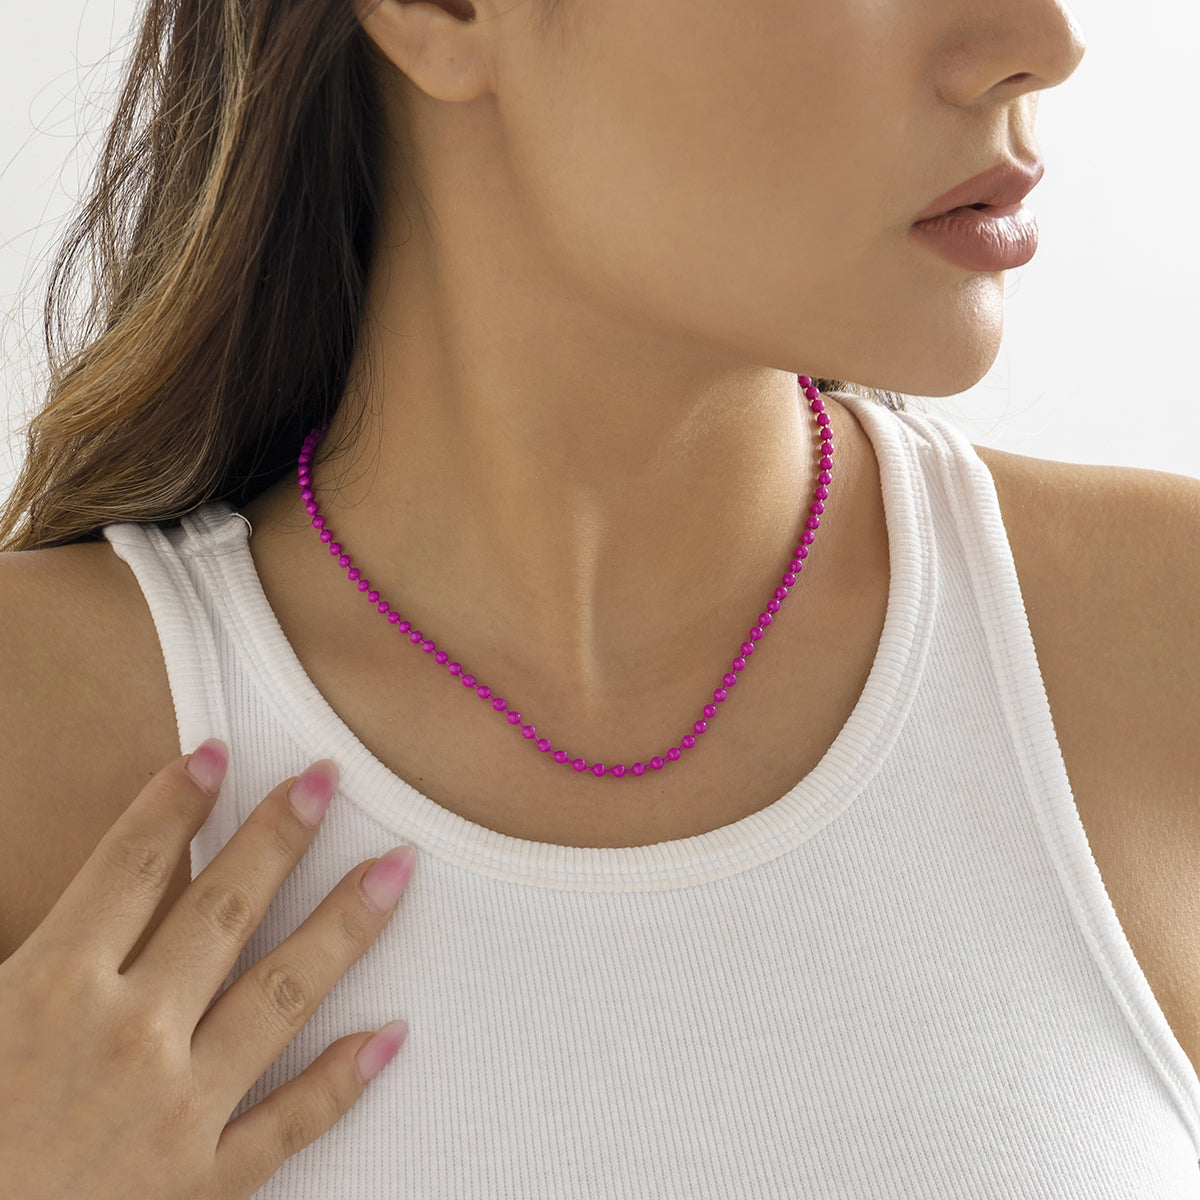 Rose Enamel & Silver-Plated Bead Chain Necklace